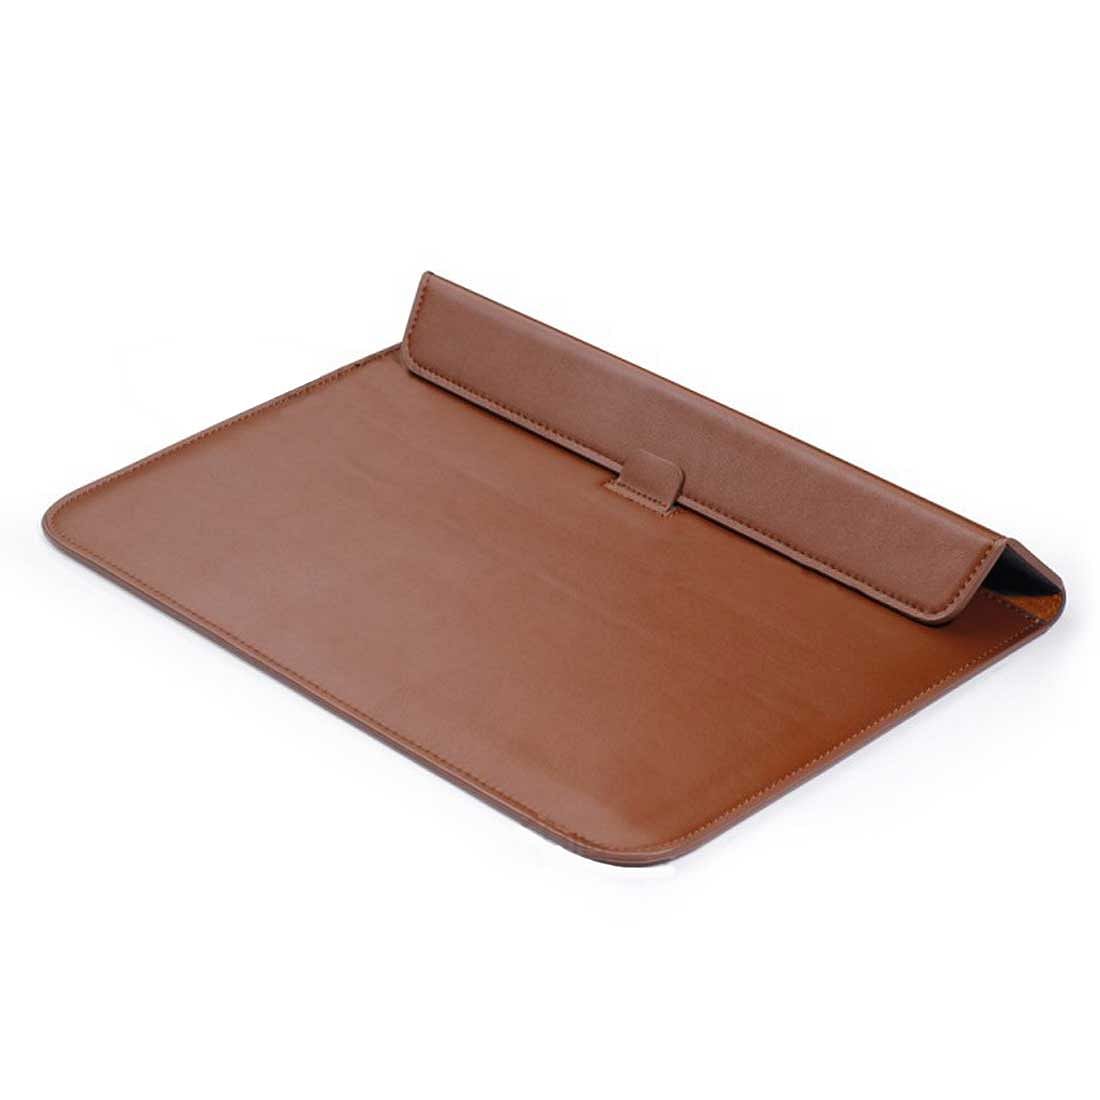 Leather Laptop Sleeve 13.3 Inch - Customized Initial Nutcase